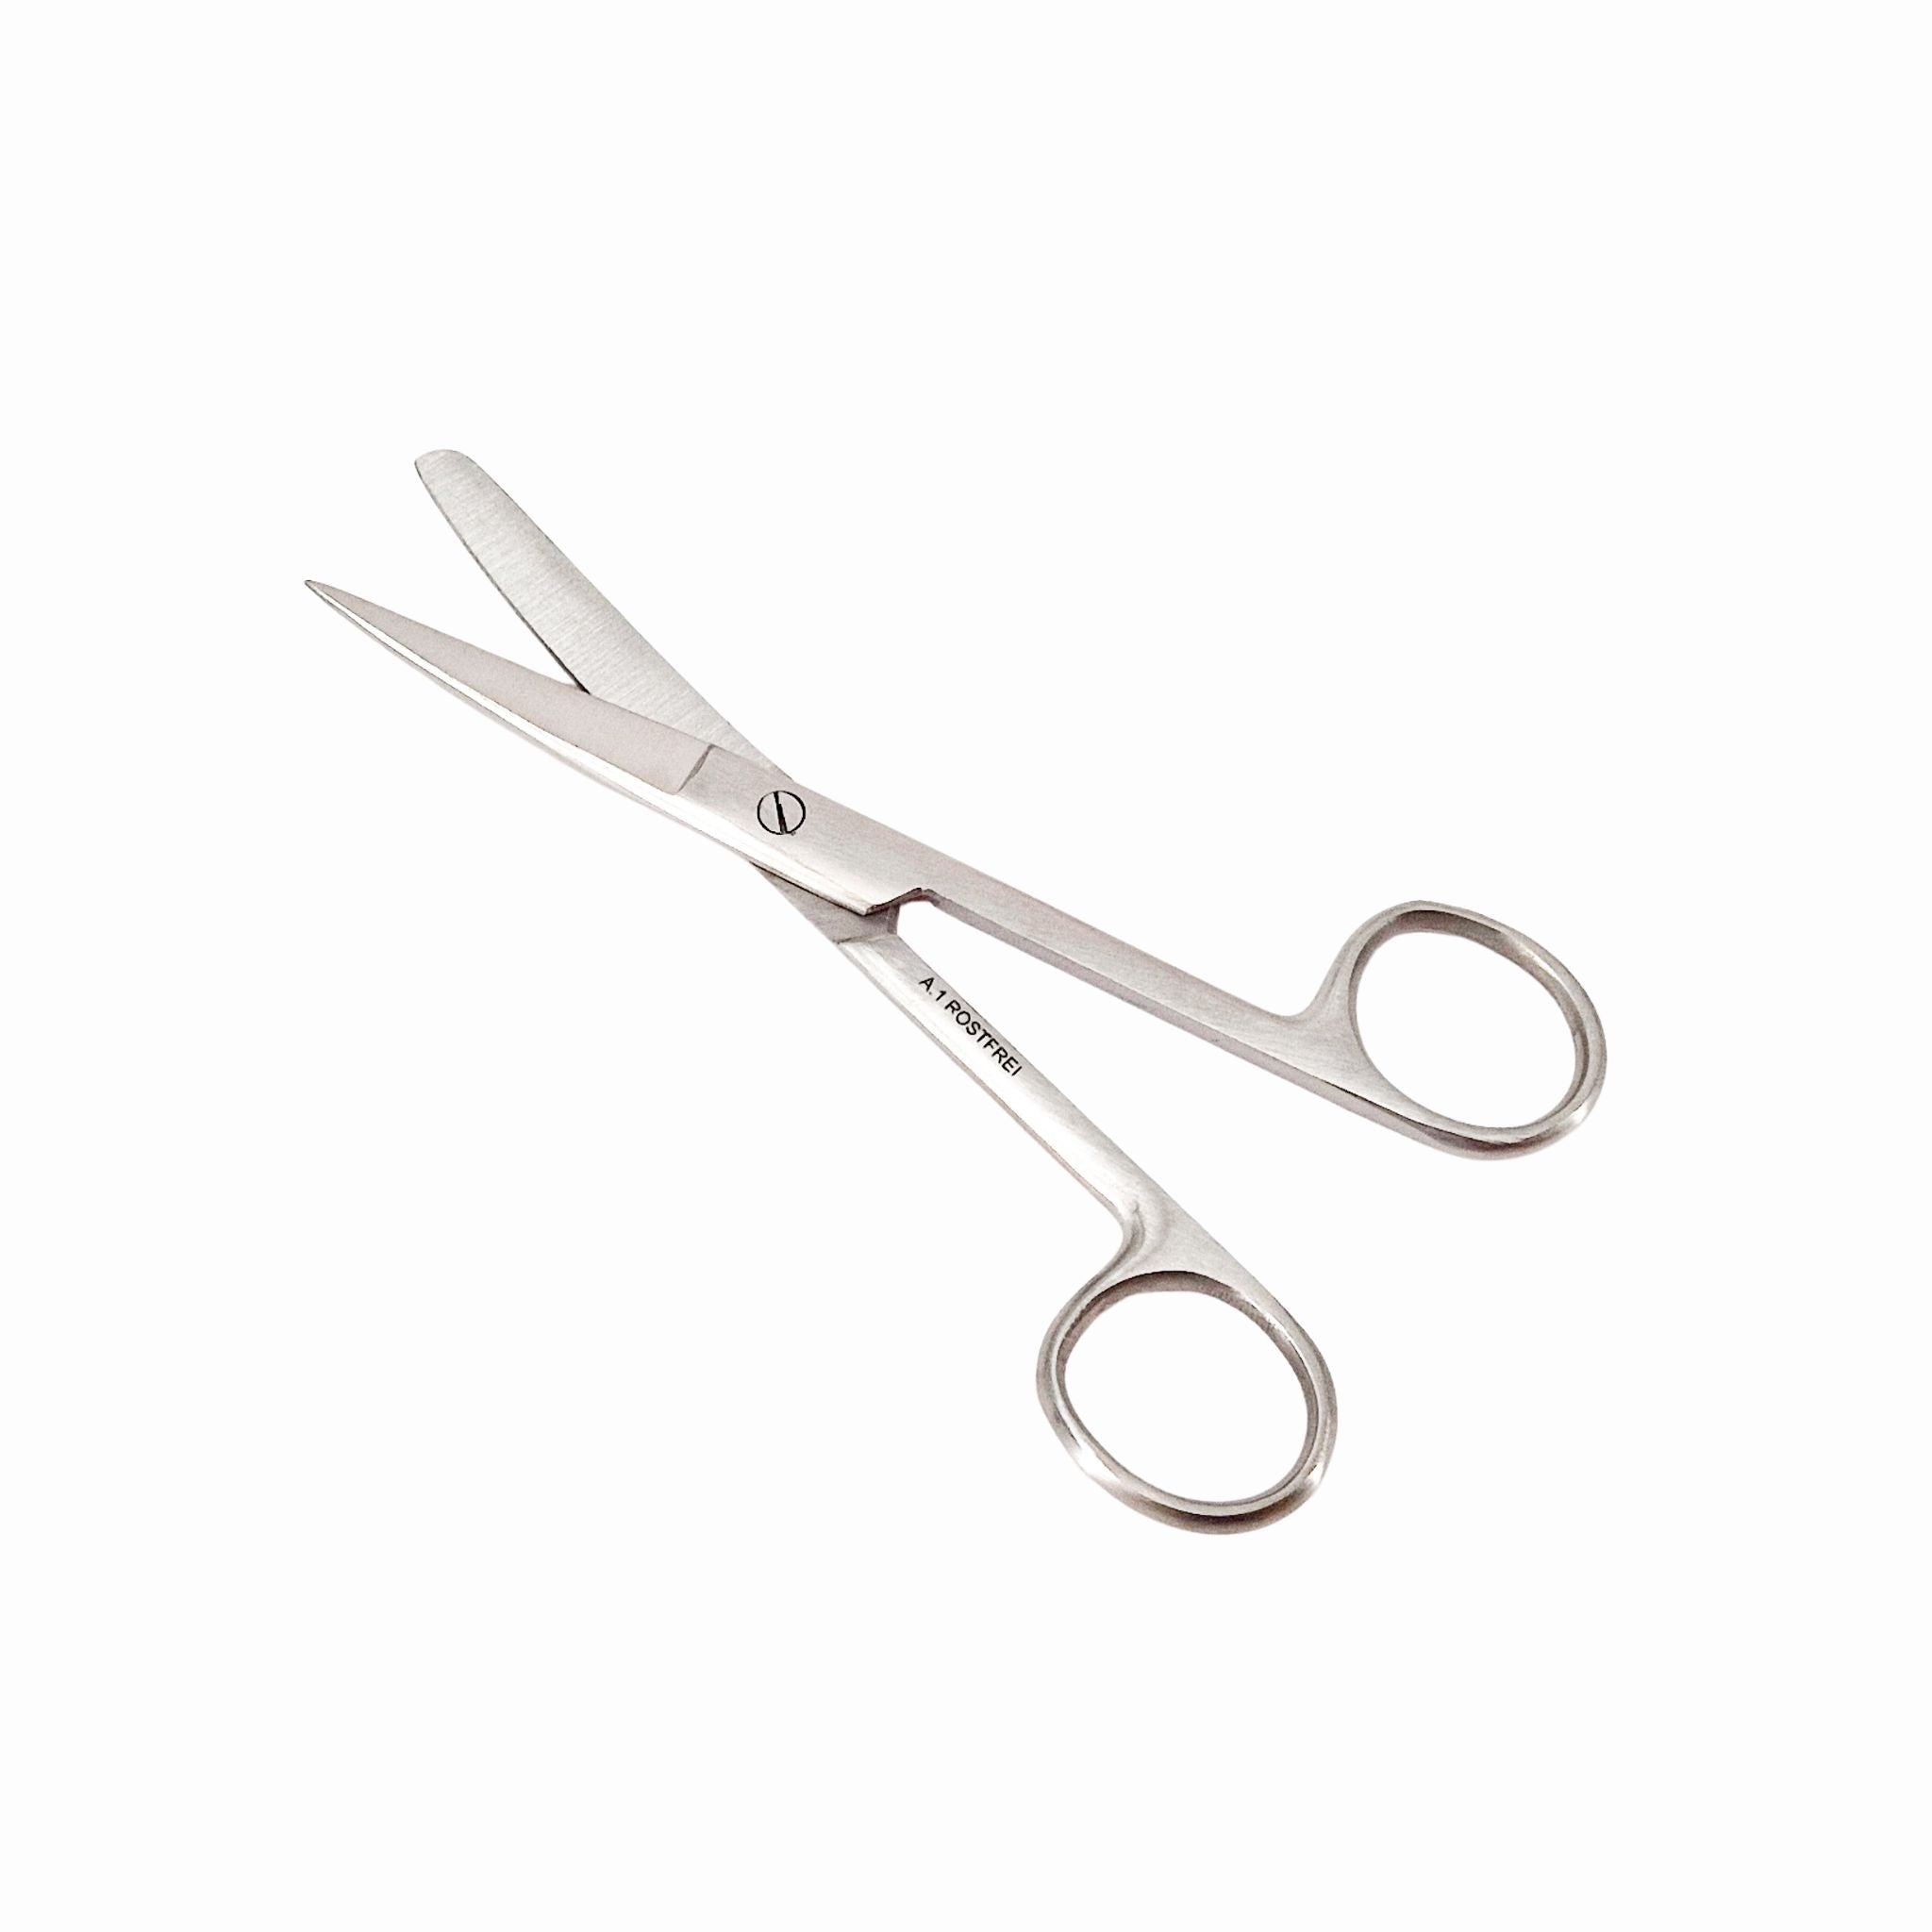 Lavabis surgical scissors curved stainless steel - 0